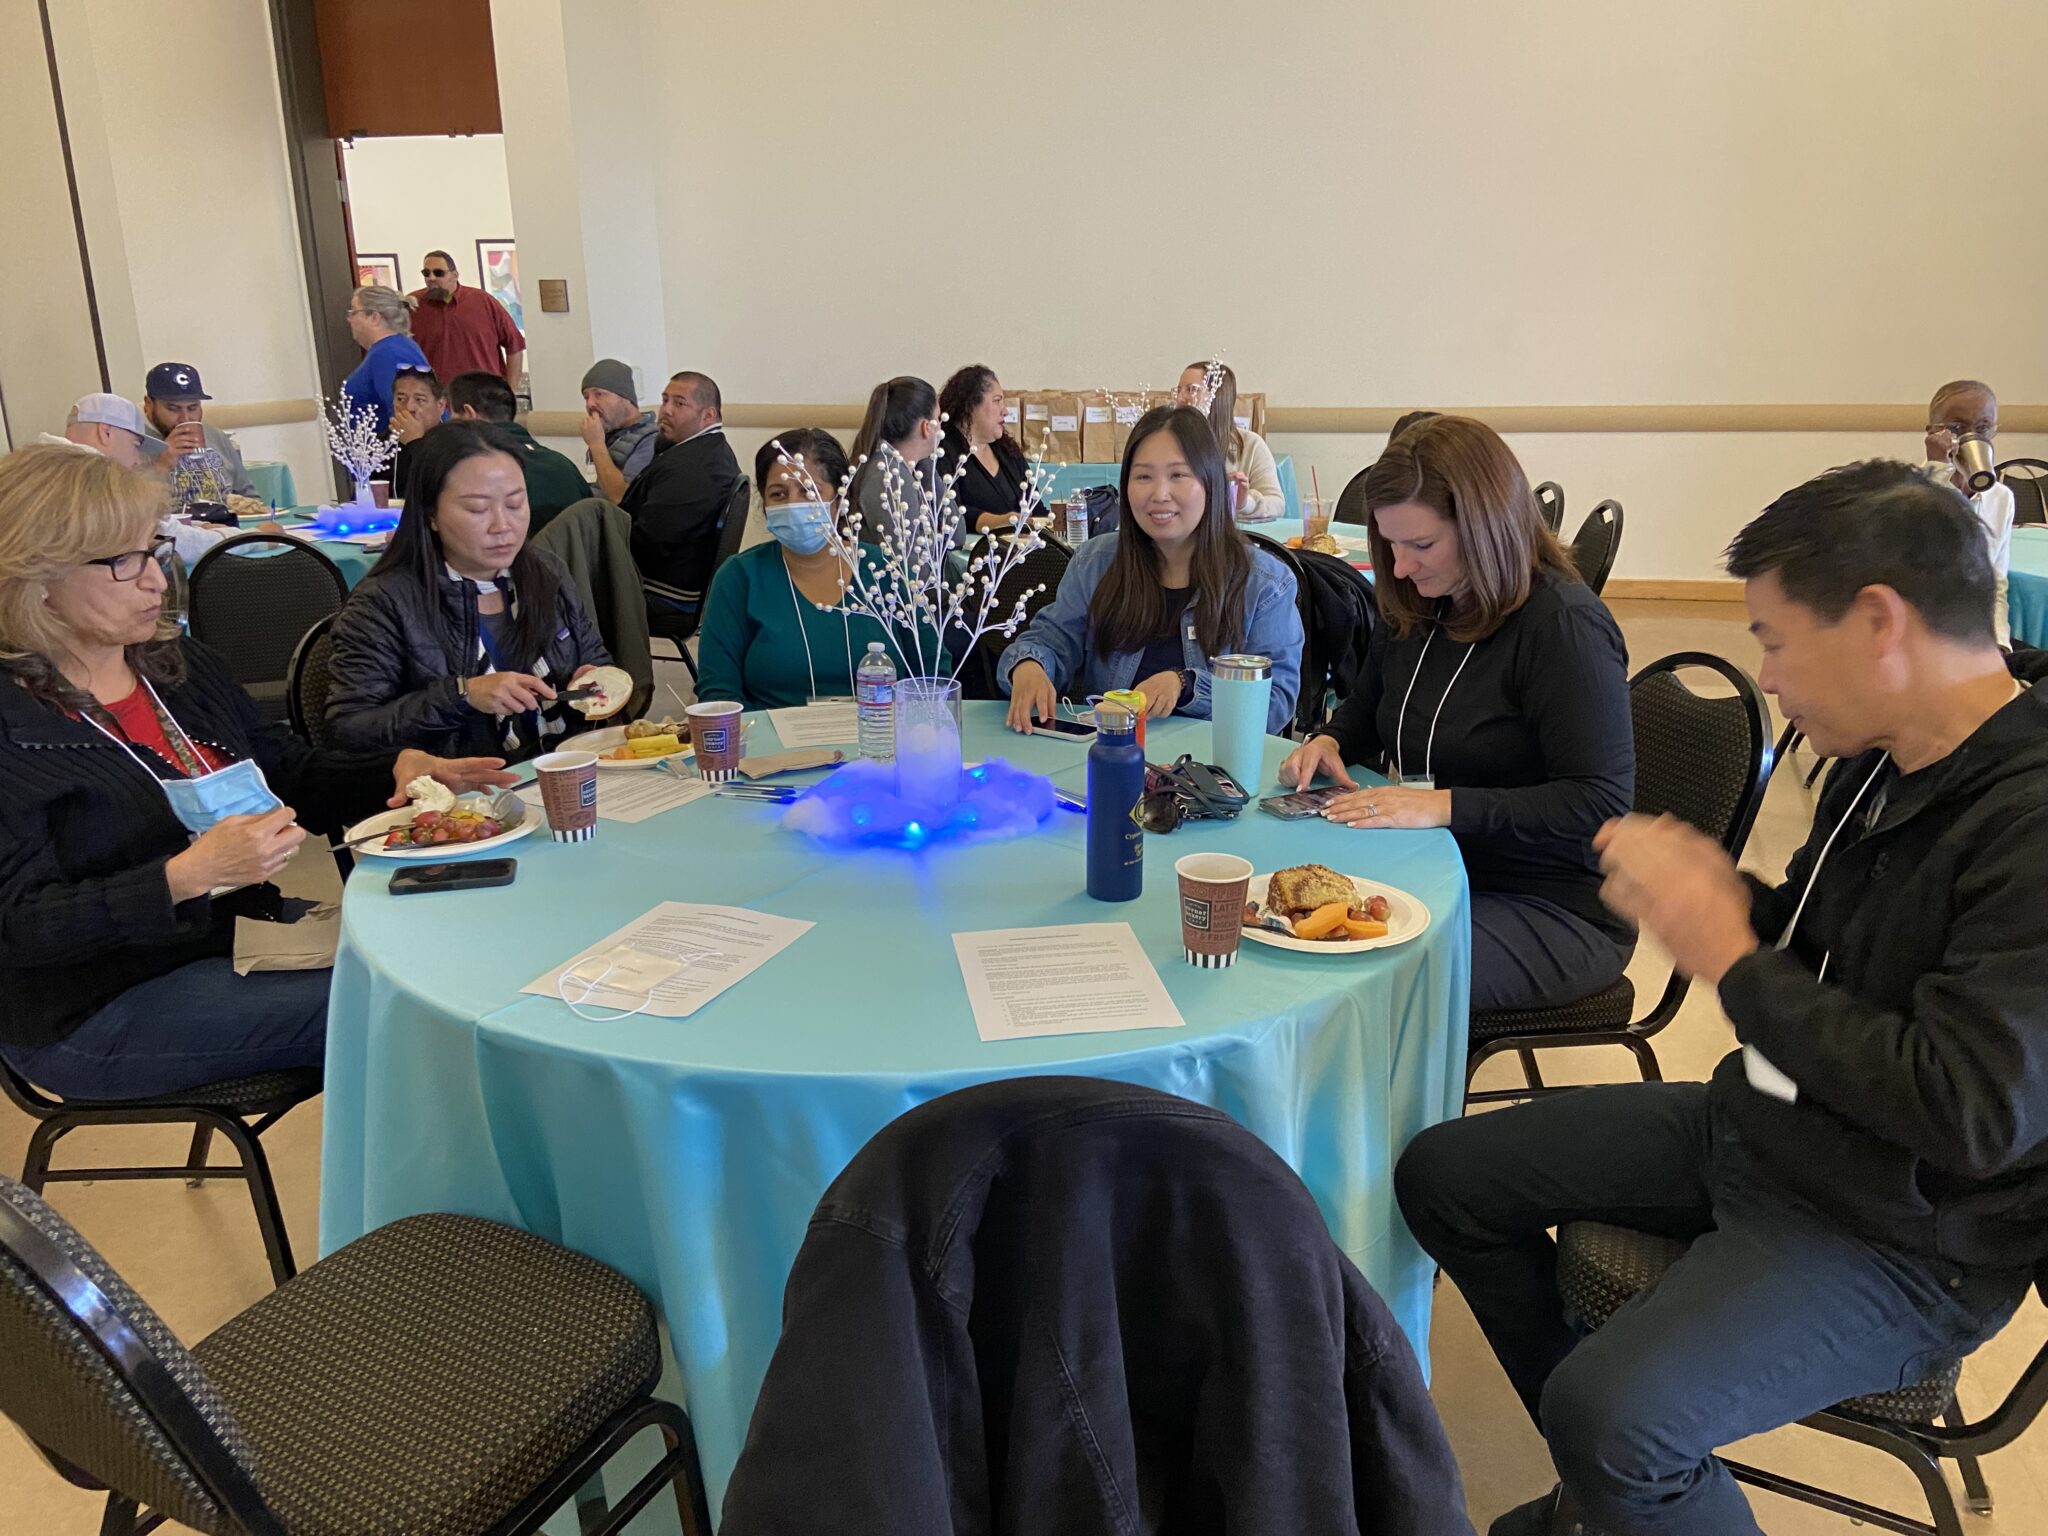 A group of classified staff sitting at a table participating in an activity using their cell phones.